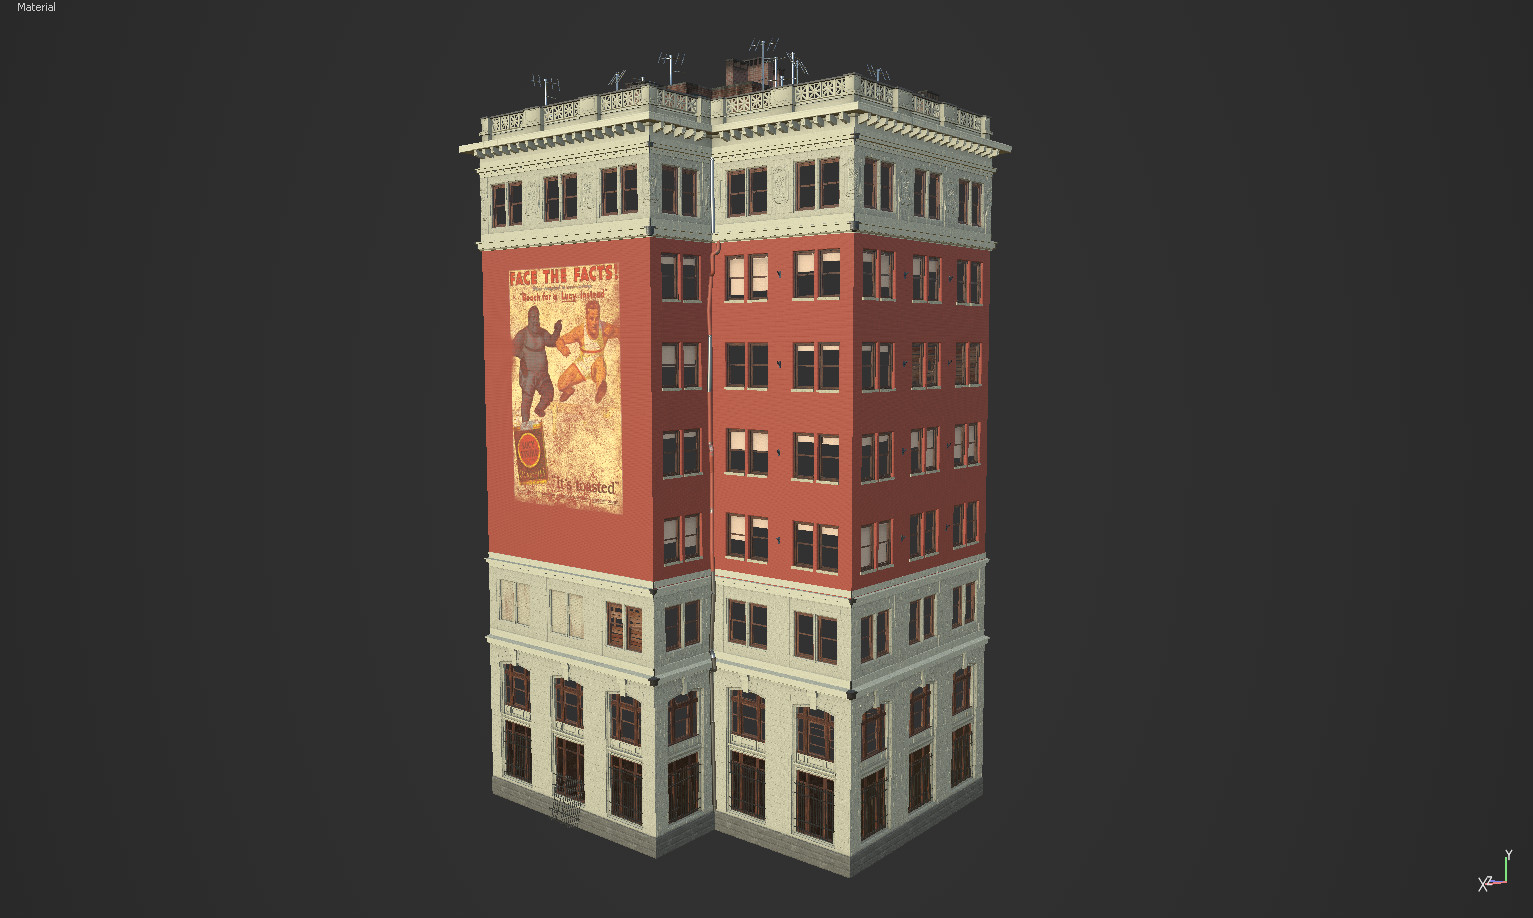 Substance painter render of an earlier version of the buildings textures. It has the bricks painted red pinkish. 